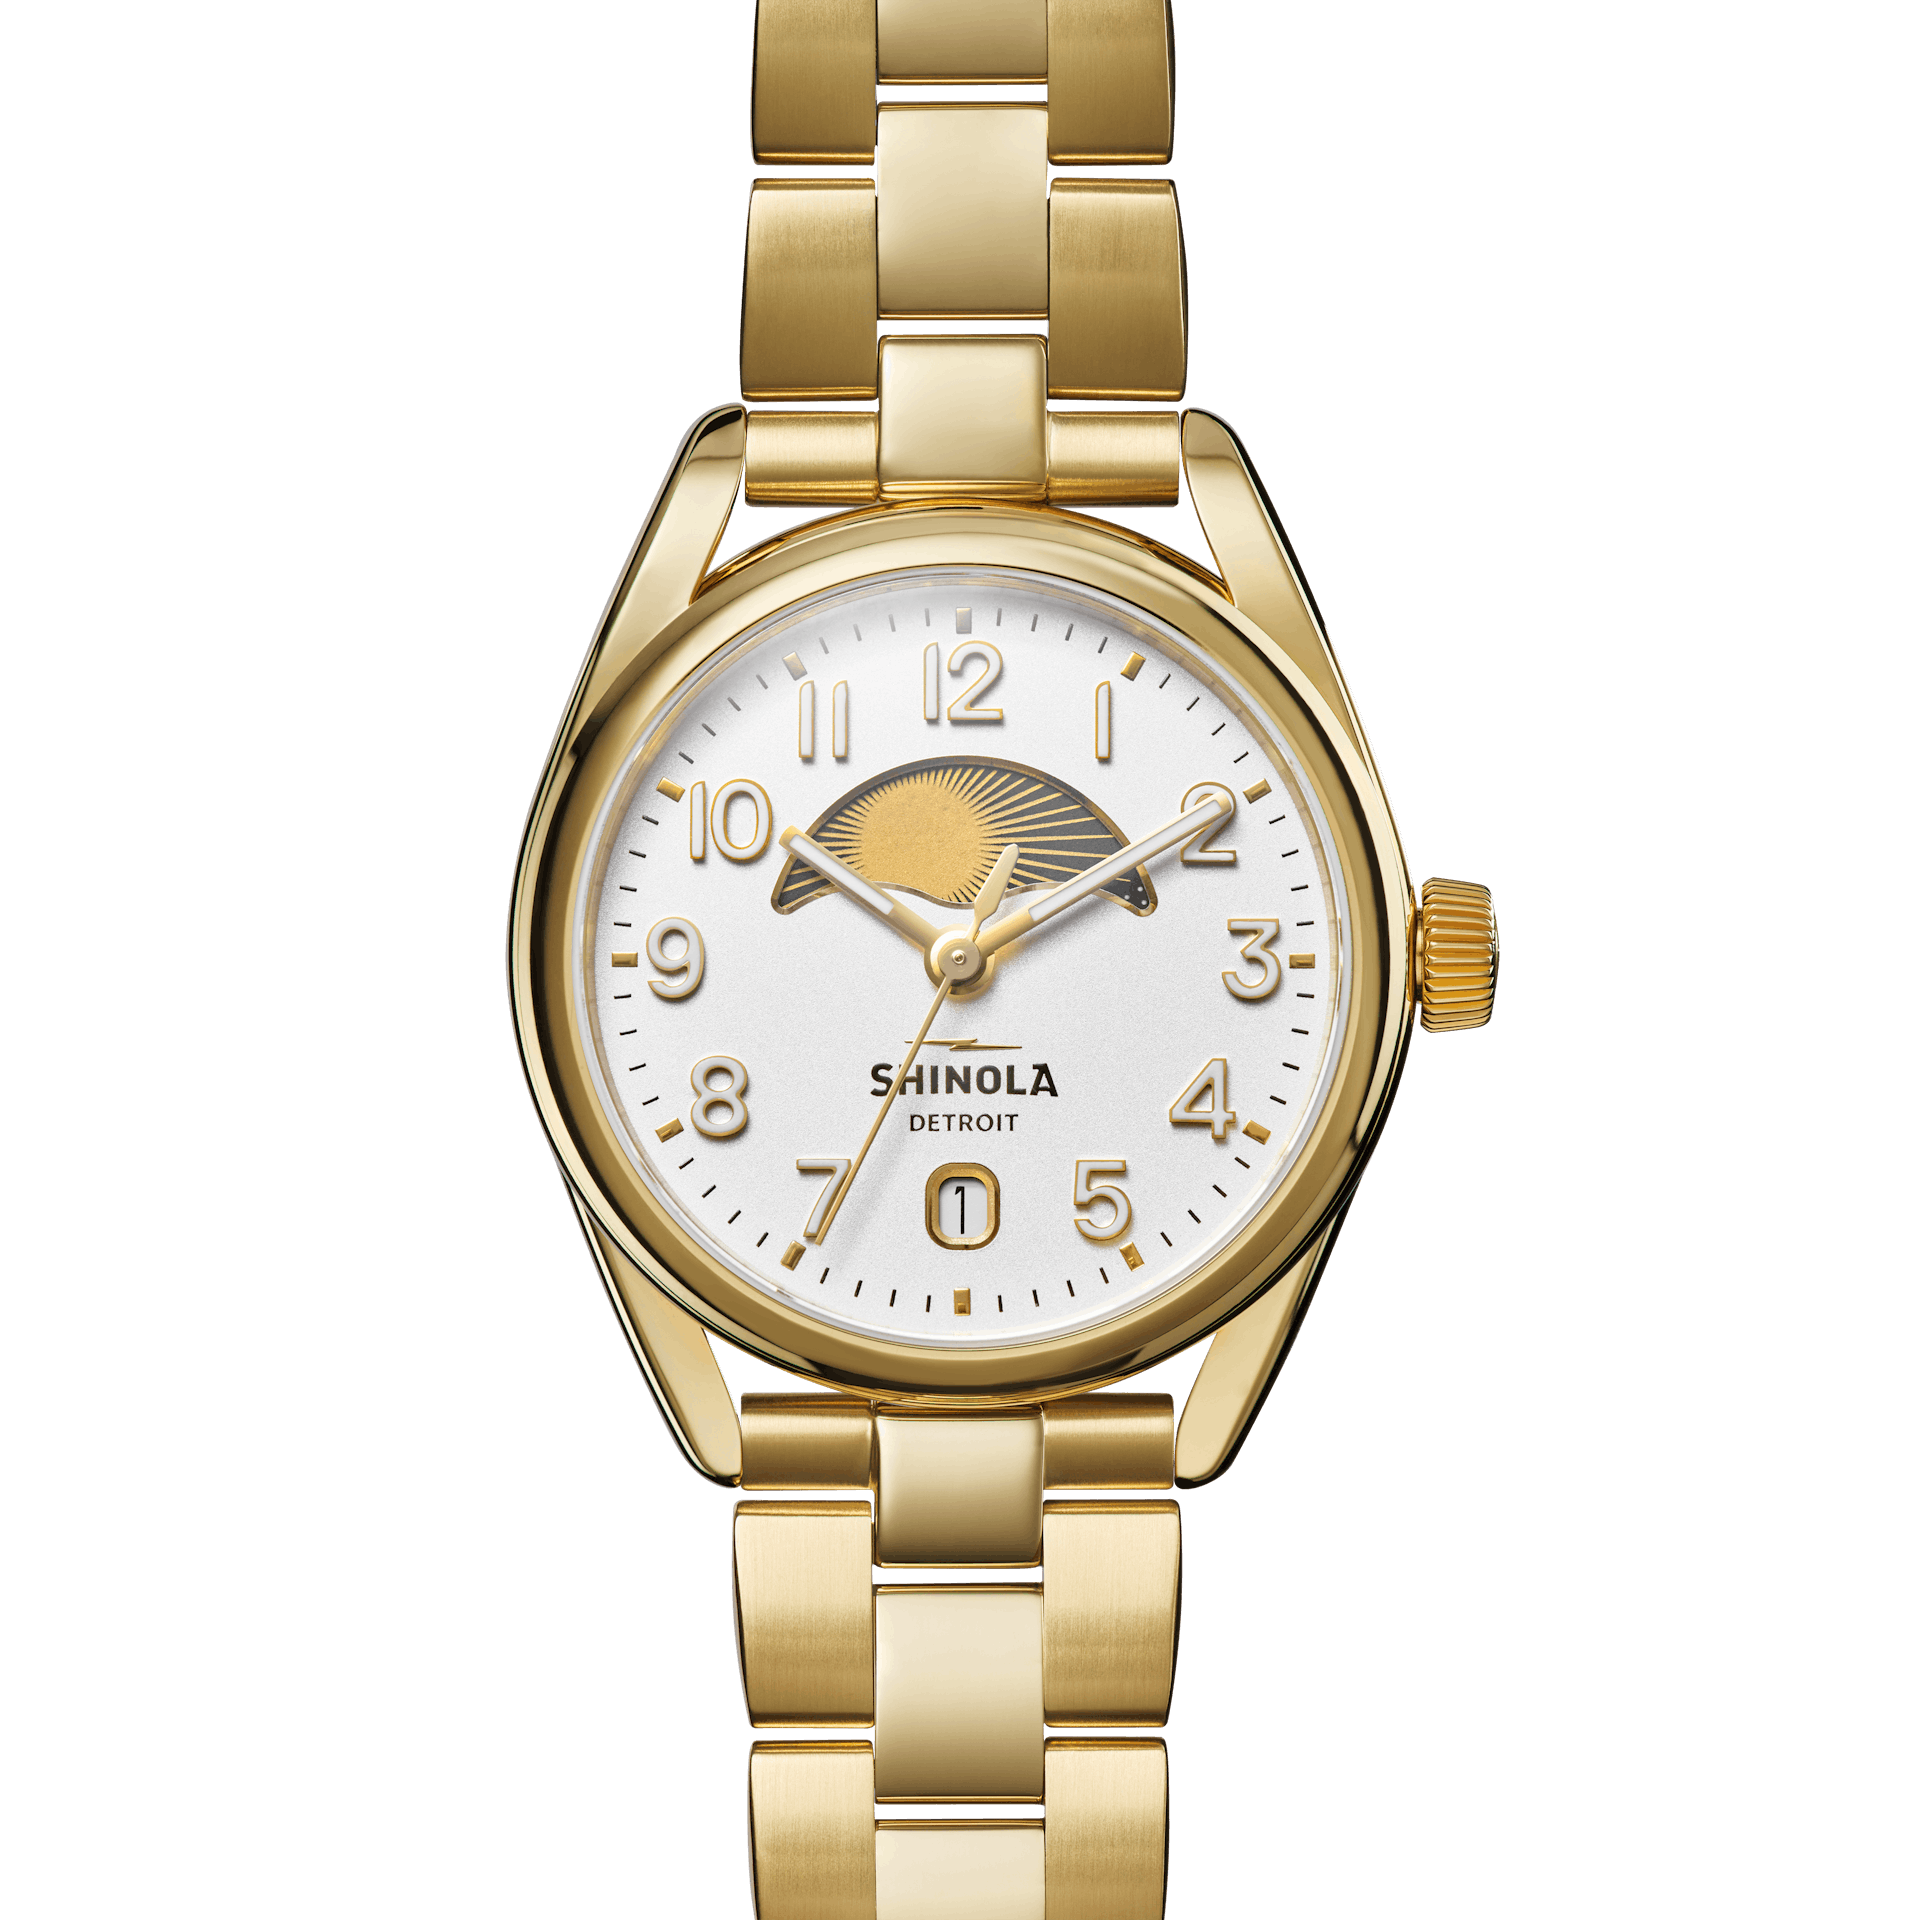 Catena Horseshoe Watch Ladies White Mother of Pearl with 20 diamonds